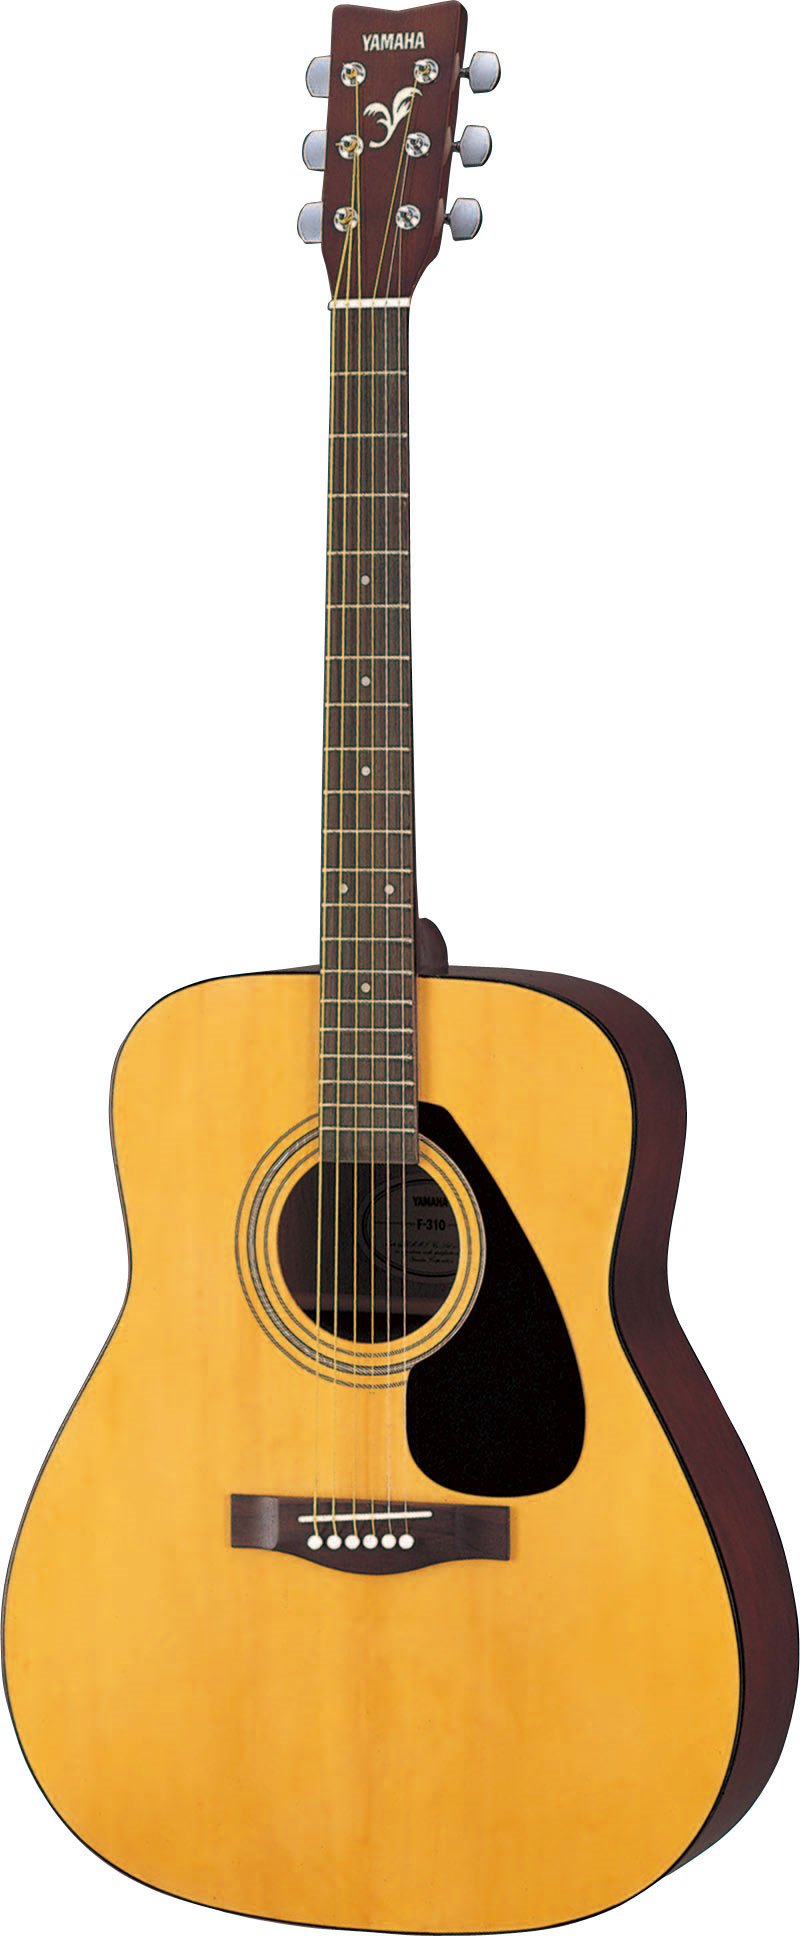 Picture of 'YAMAHA F310 Acoustic Guitar Rental 90 AED/Month (Minimum 3 months)'